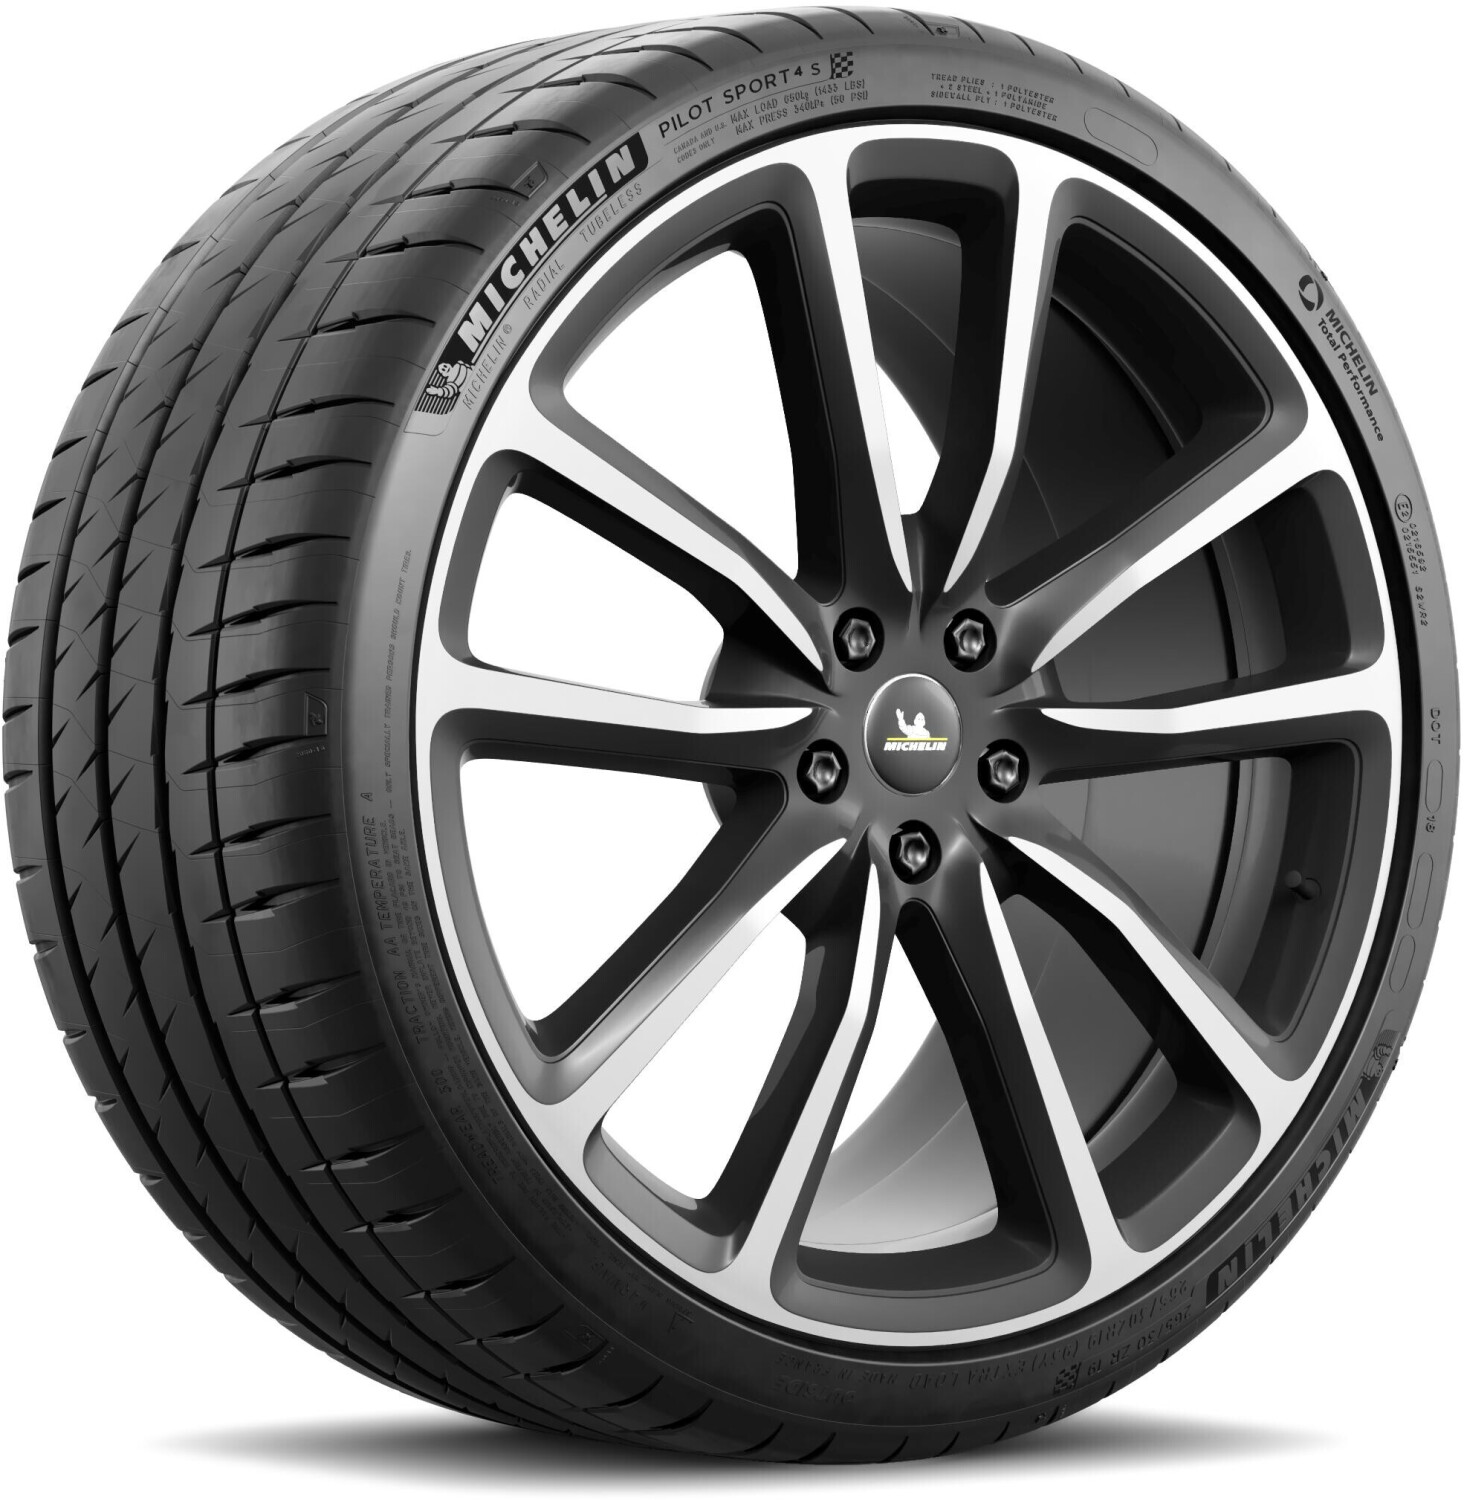 Buy Michelin Pilot Sport 4S 265/30 R19 93Y from £233.64 (Today) – Best